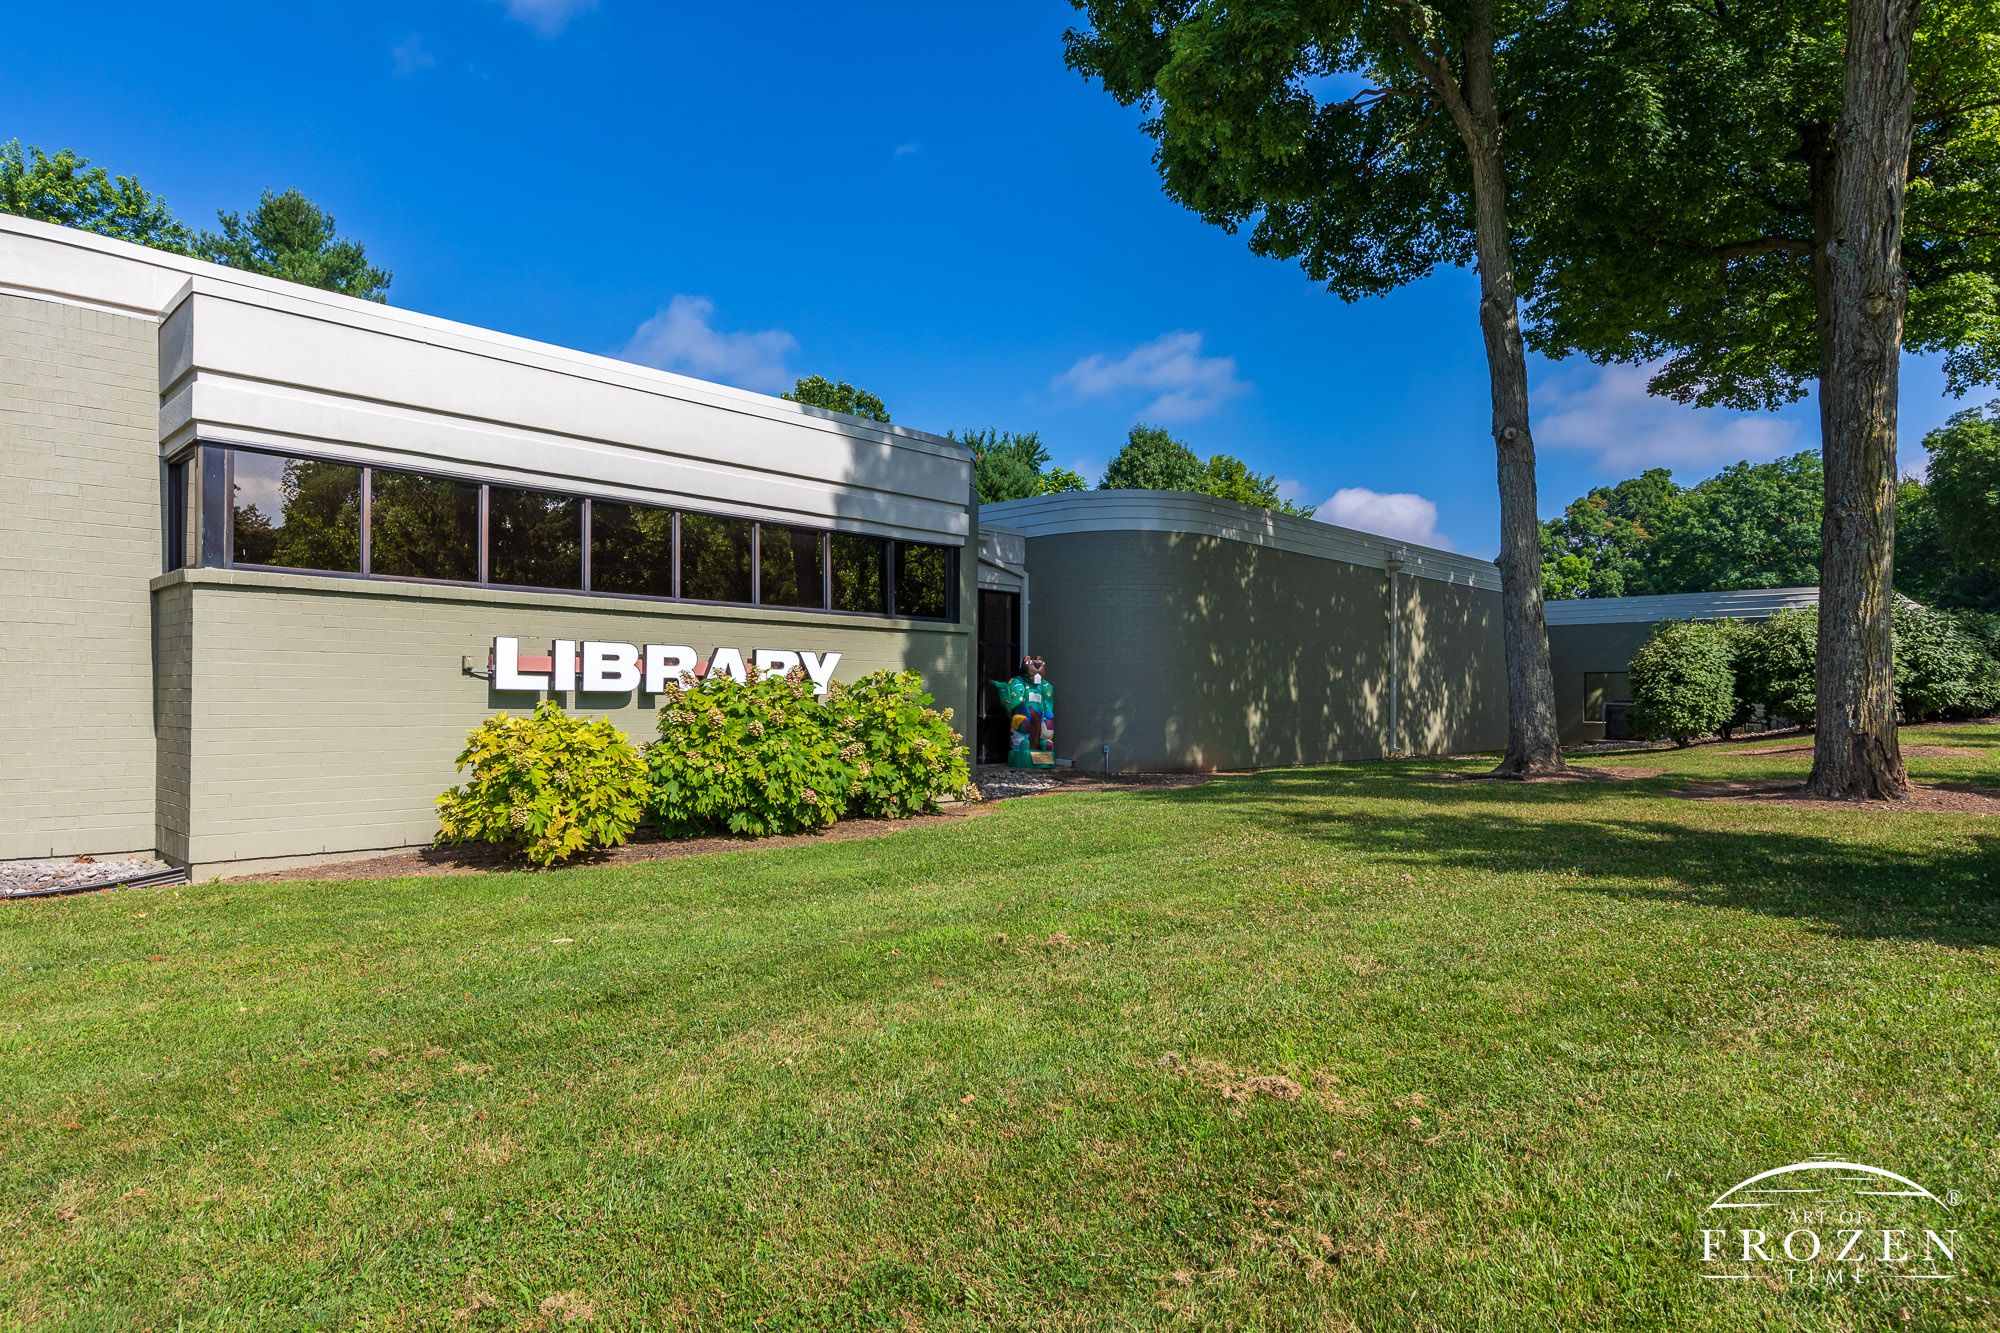 Outside view of the Beavercreek Ohio Community Library on pleasant July day